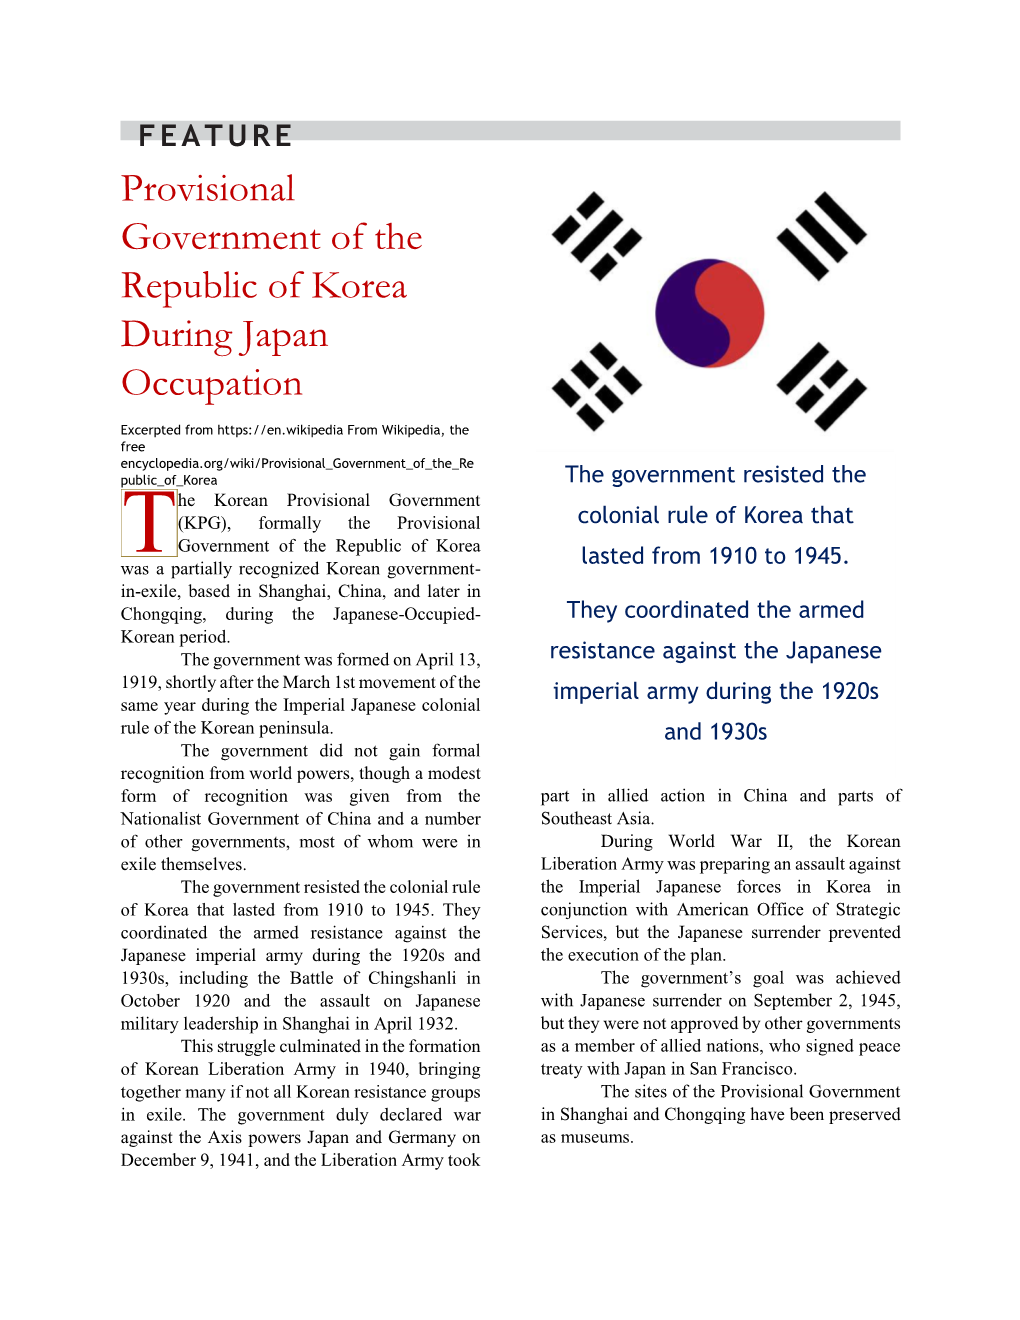 Provisional Government of the Republic of Korea During Japan Occupation